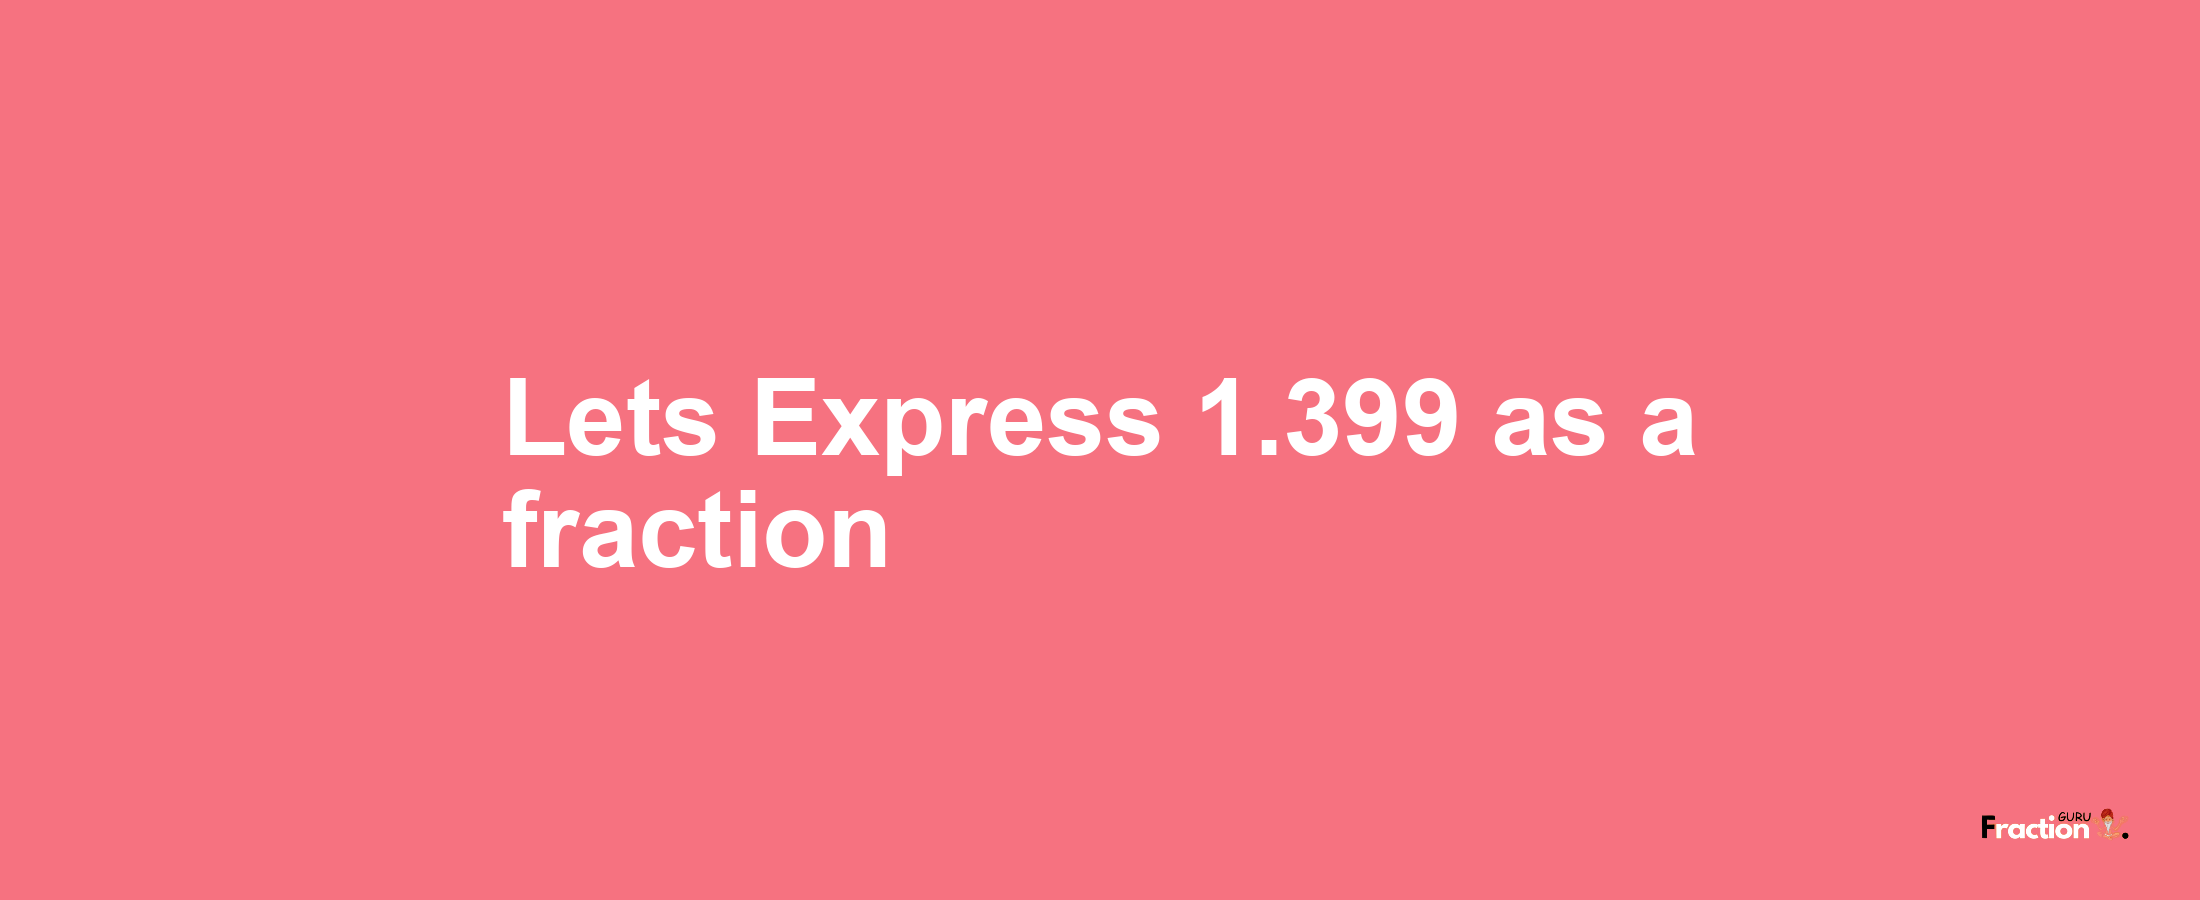 Lets Express 1.399 as afraction